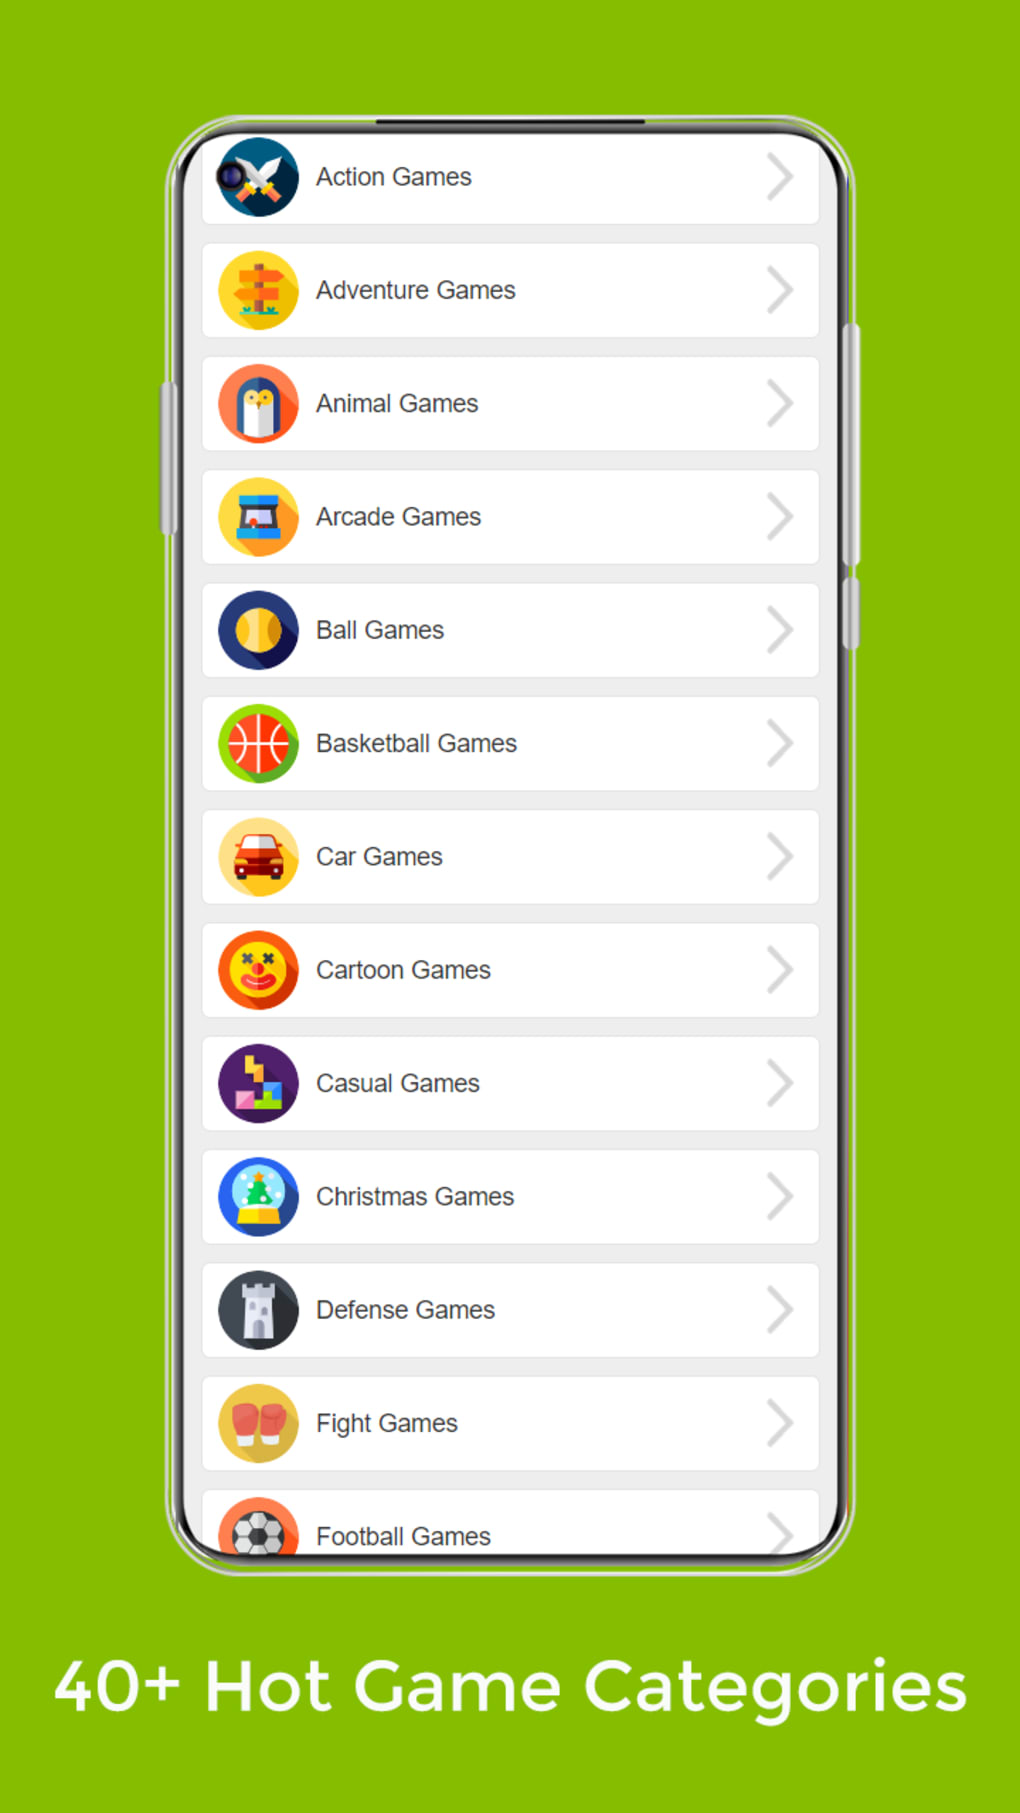 1000 Free Games APK (Android Game) - Free Download